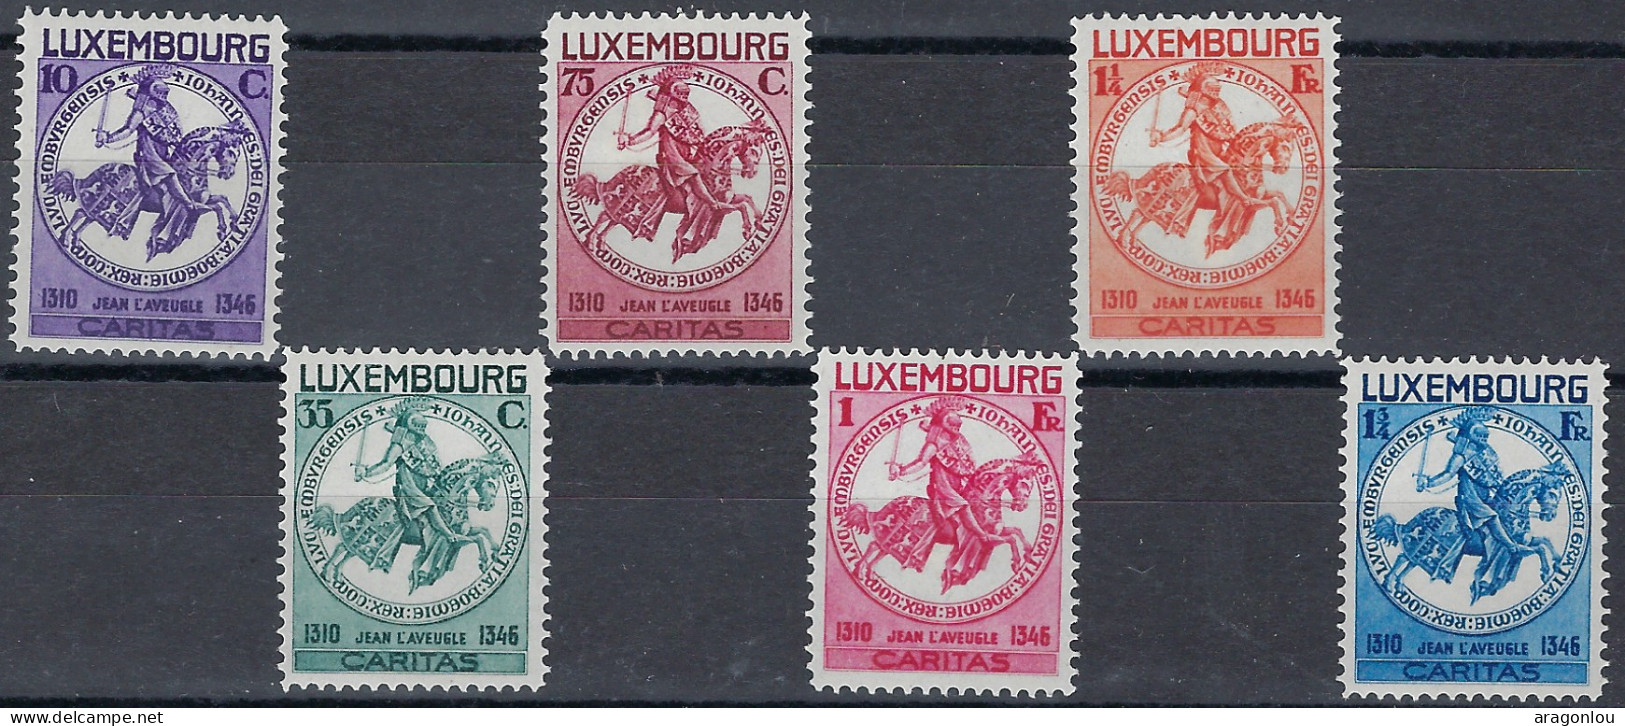 Luxembourg - Luxemburg - Timbres - 1934   Jean L'Aveugle   Série  * - Used Stamps